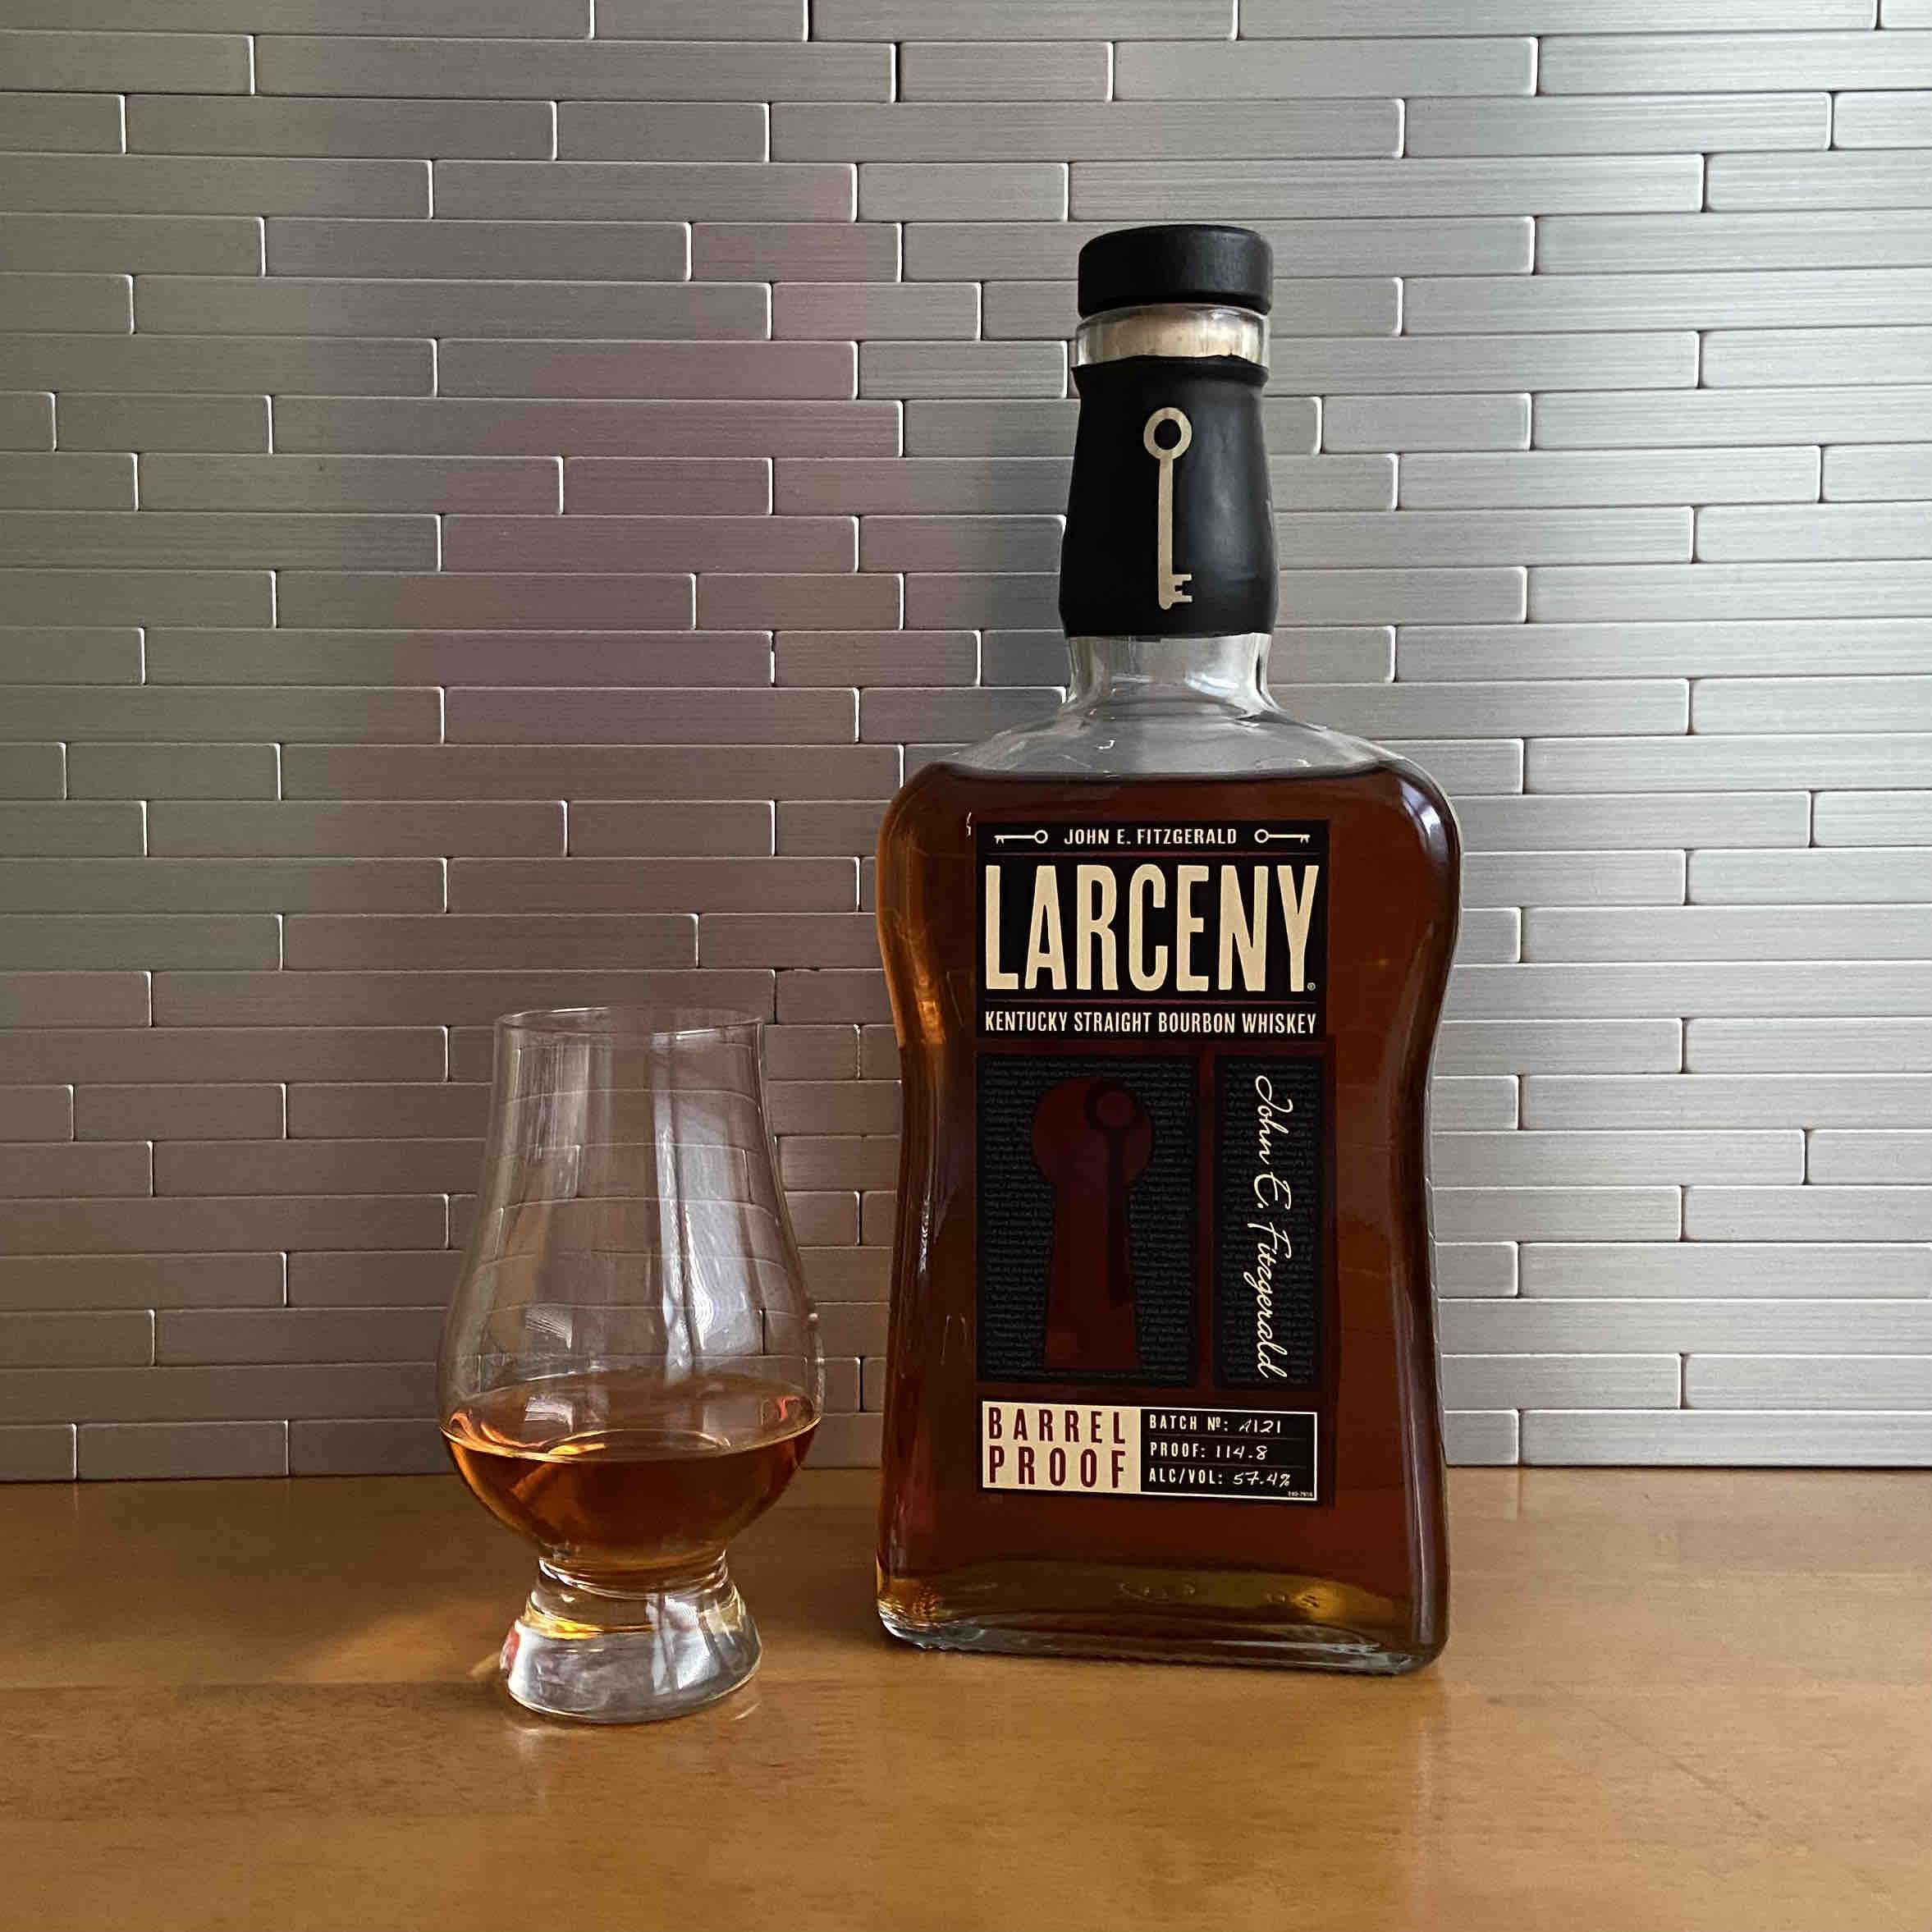 A pour of Larceny Barrel Proof, Batch No. A121 that comes in at 114.8 proof.